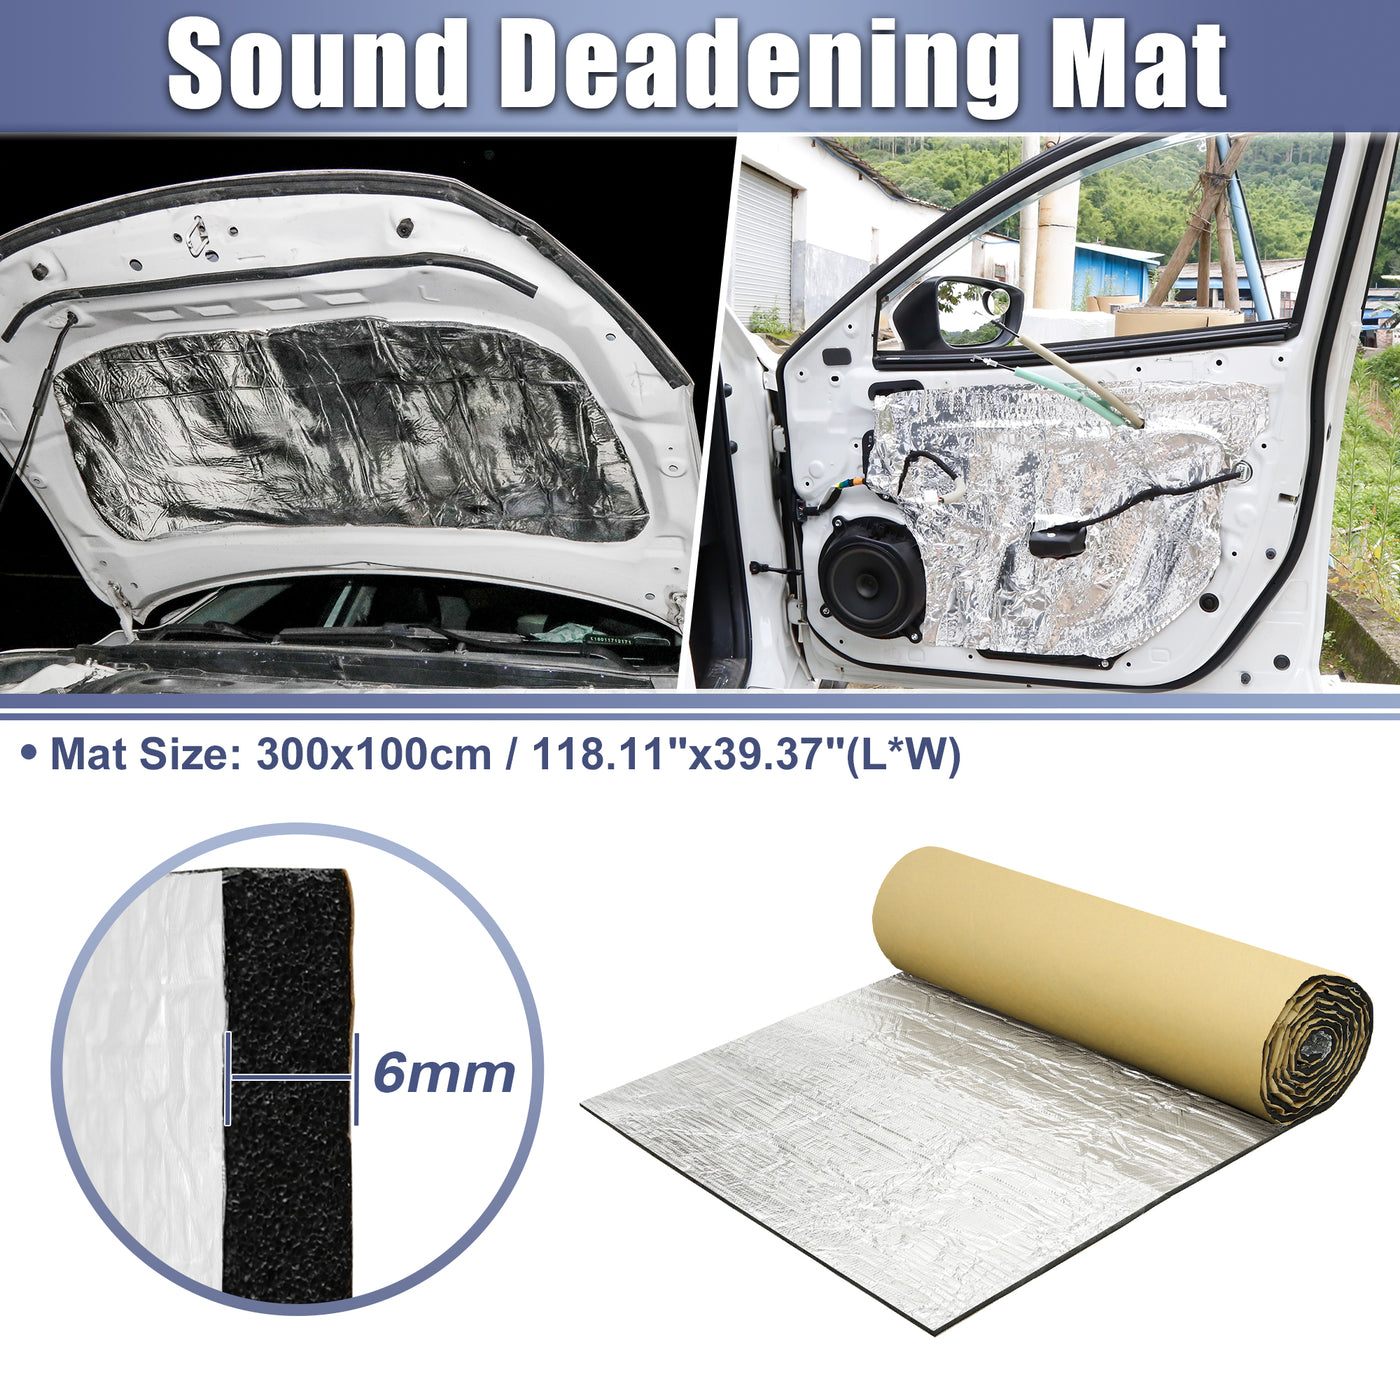 X AUTOHAUX 236mil 6mm 32.29sqft Car Sound Deadening Mat Aluminum Closed Cell Foam Heat Shield Material Damping Self Adhesive Universal for Hood Fender and Boat Engine Cover 118.11"x39.37"